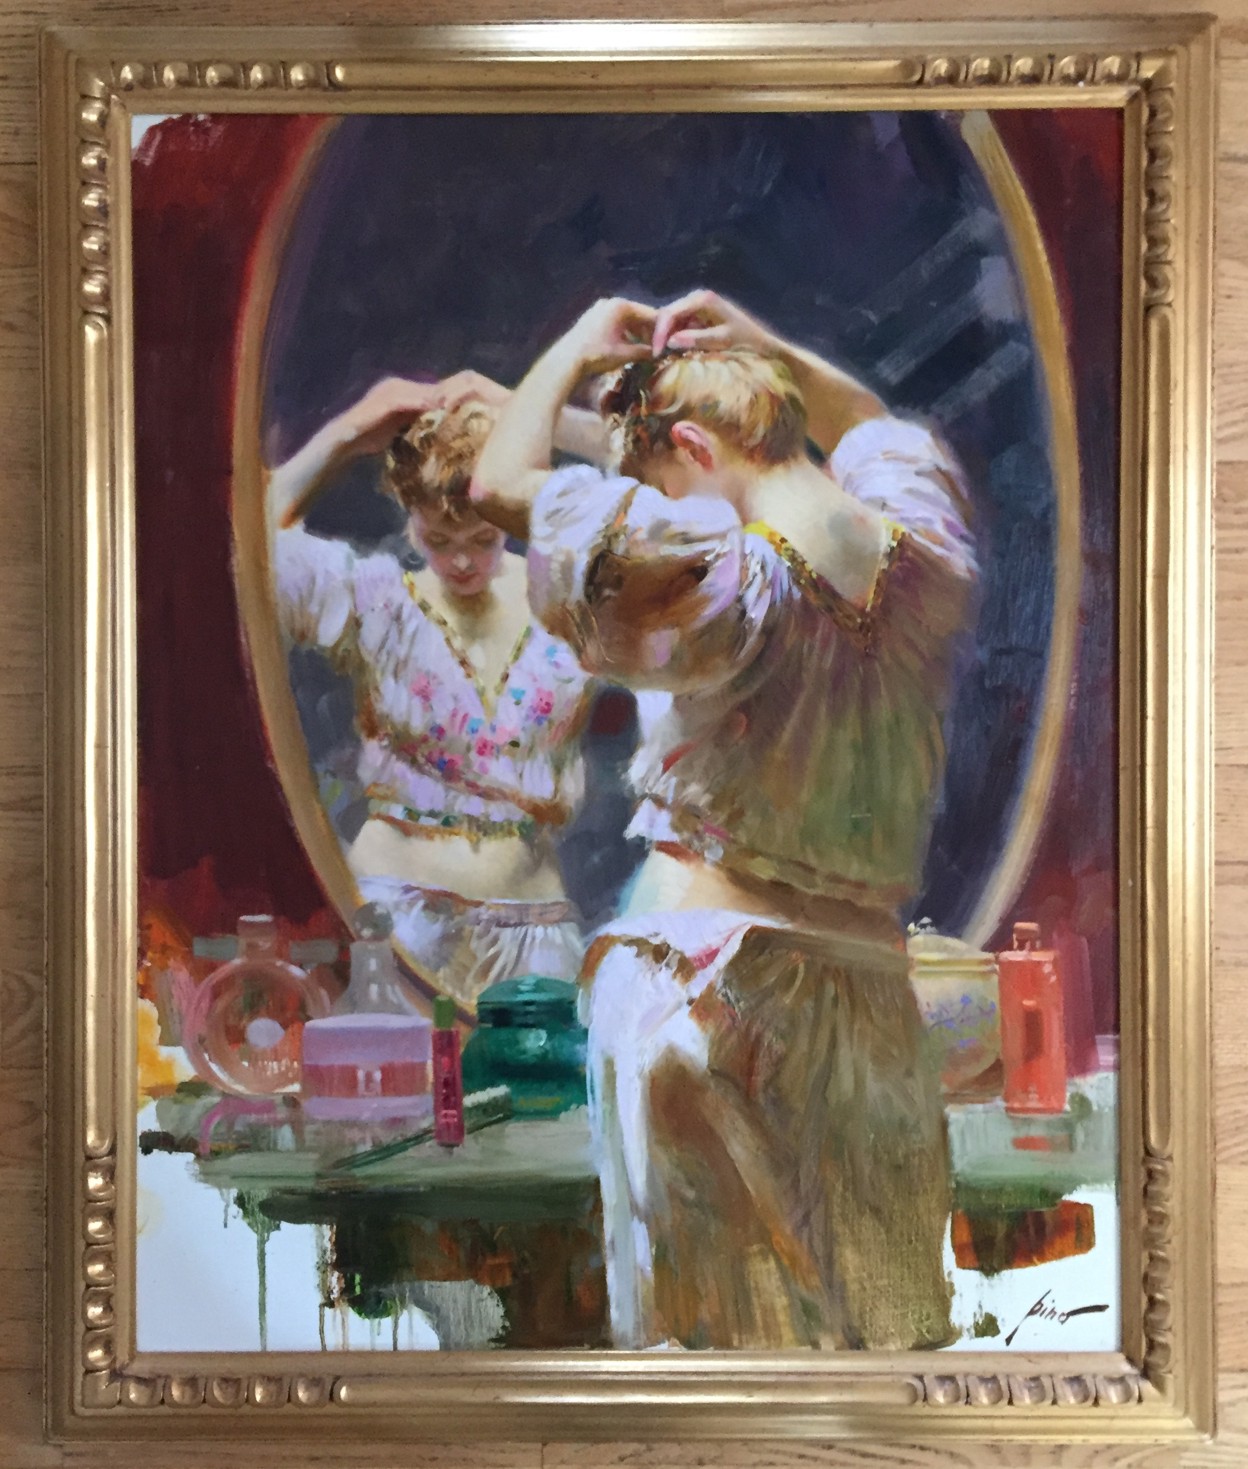 Girl in Mirror by Pino

Original Painting, Oil on Canvas